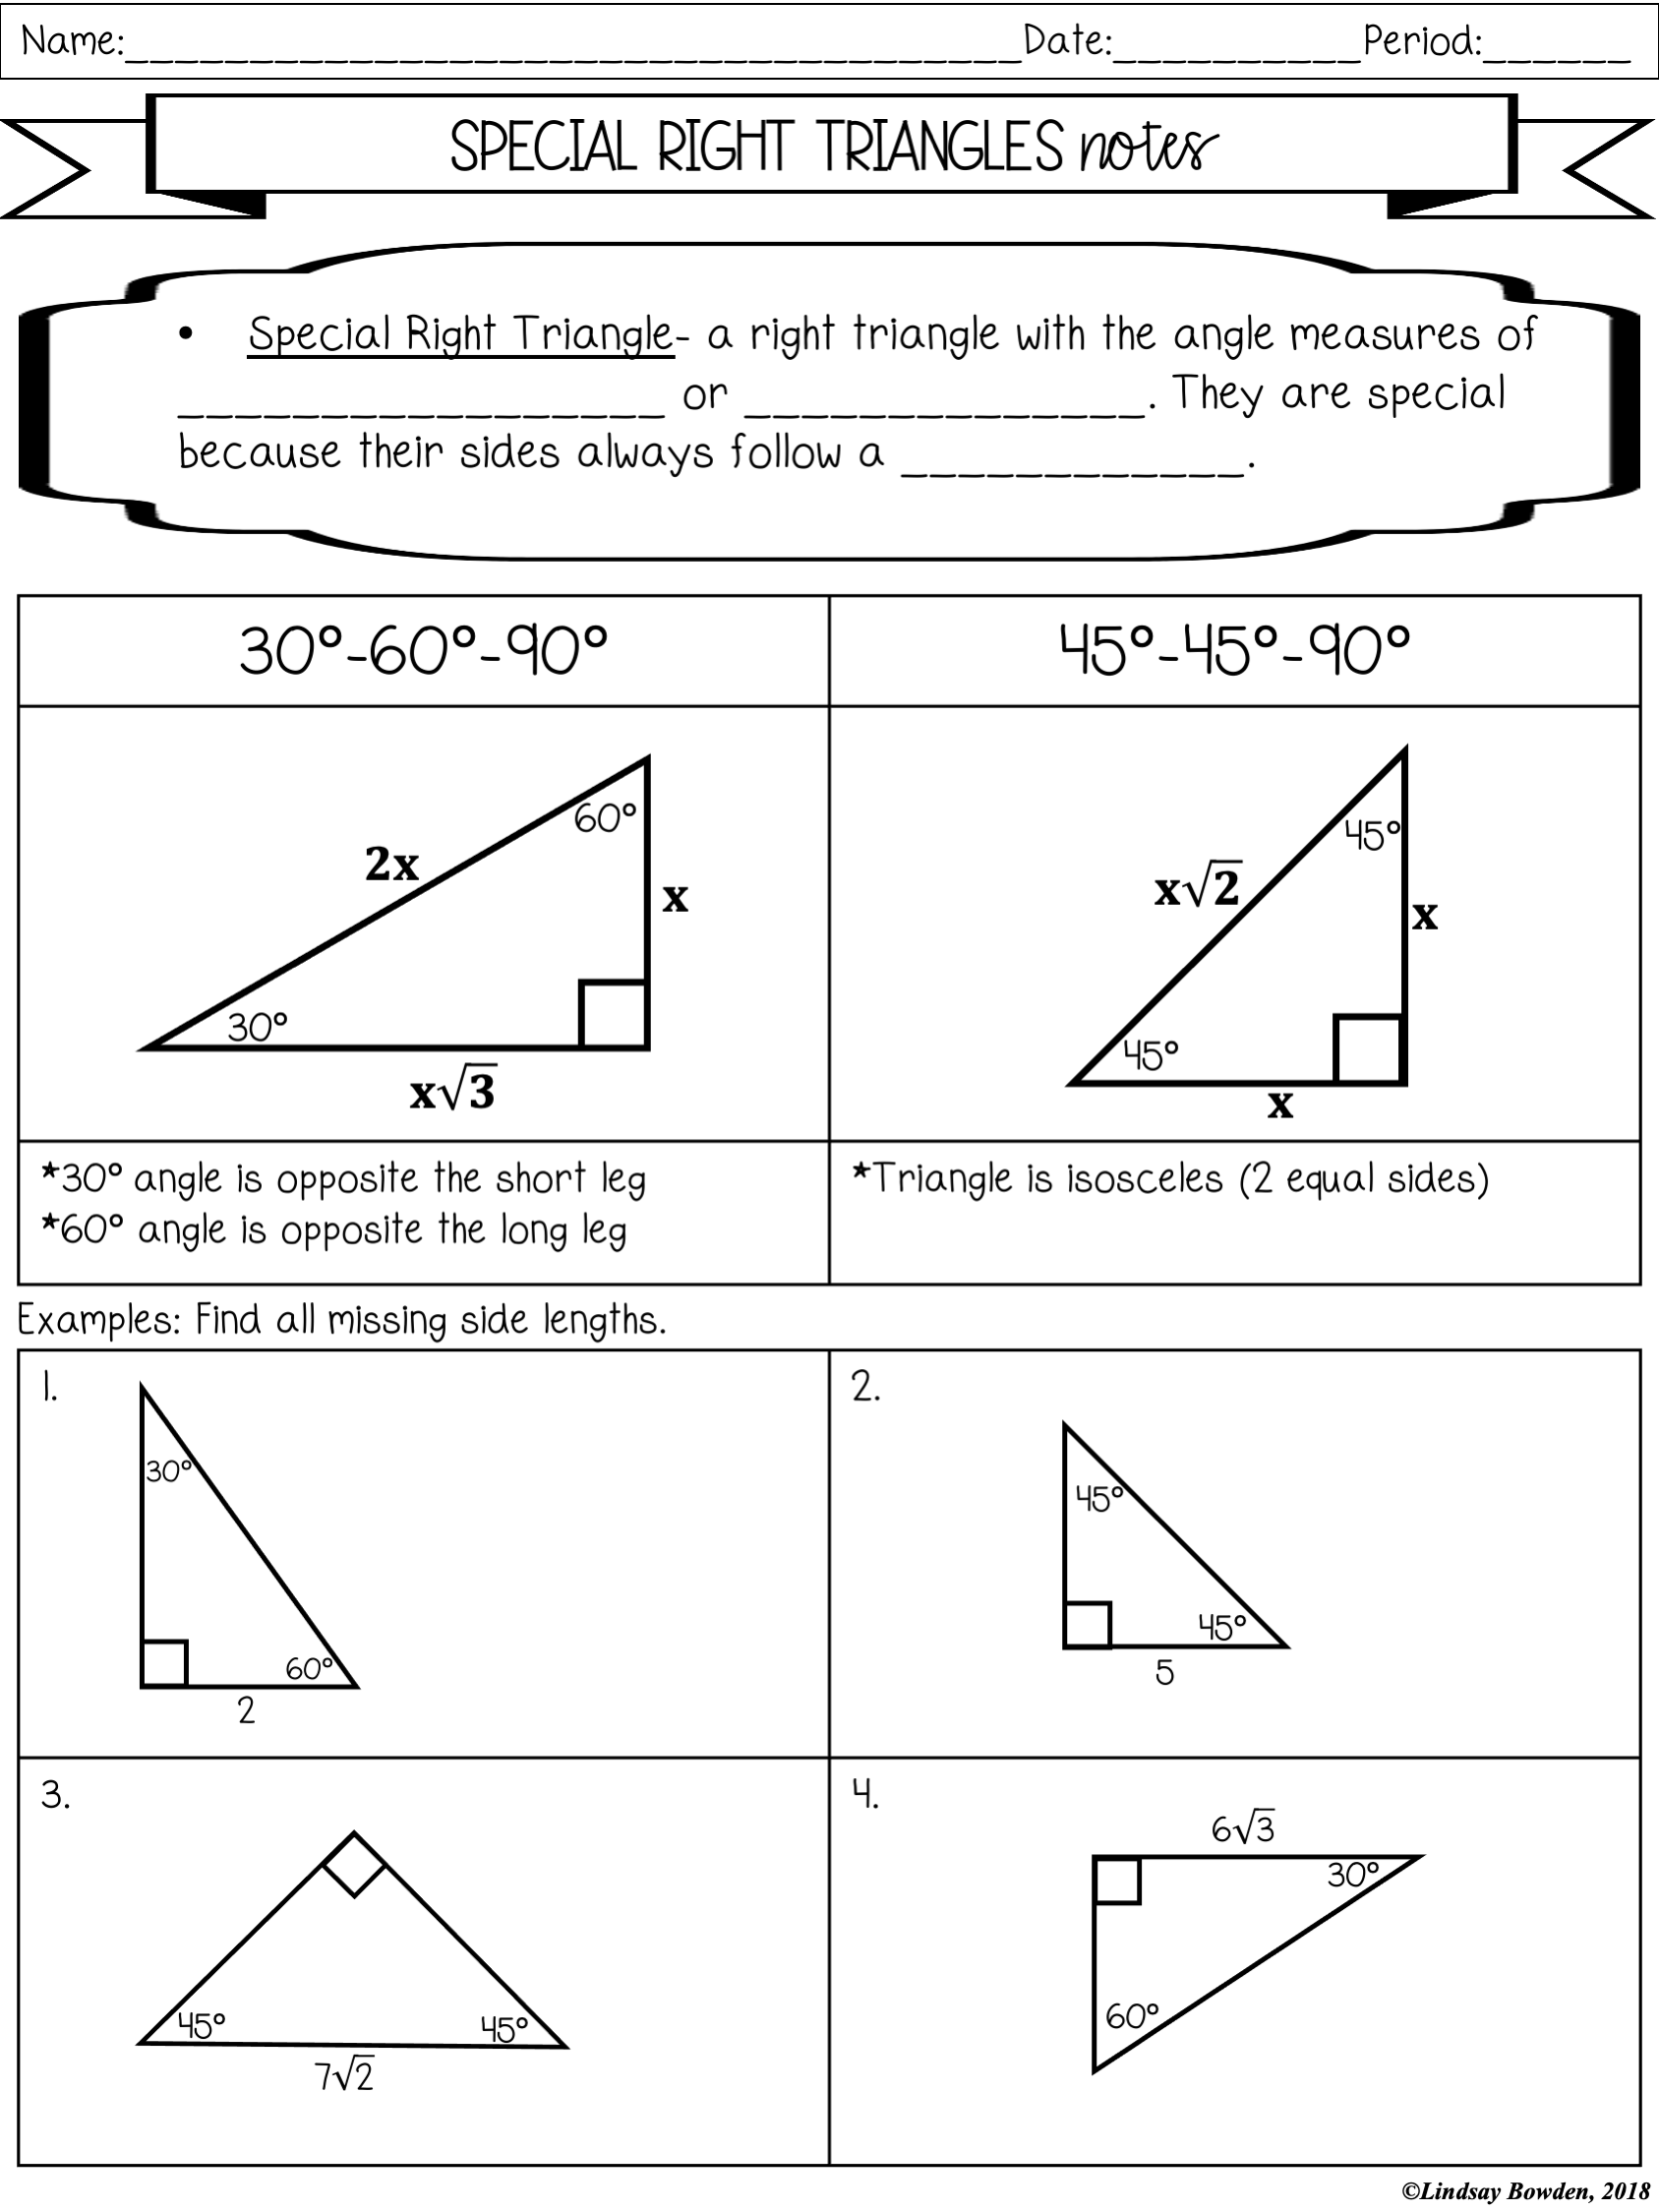 Special Right Triangles Notes and Worksheets - Lindsay Bowden Pertaining To Special Right Triangles Worksheet